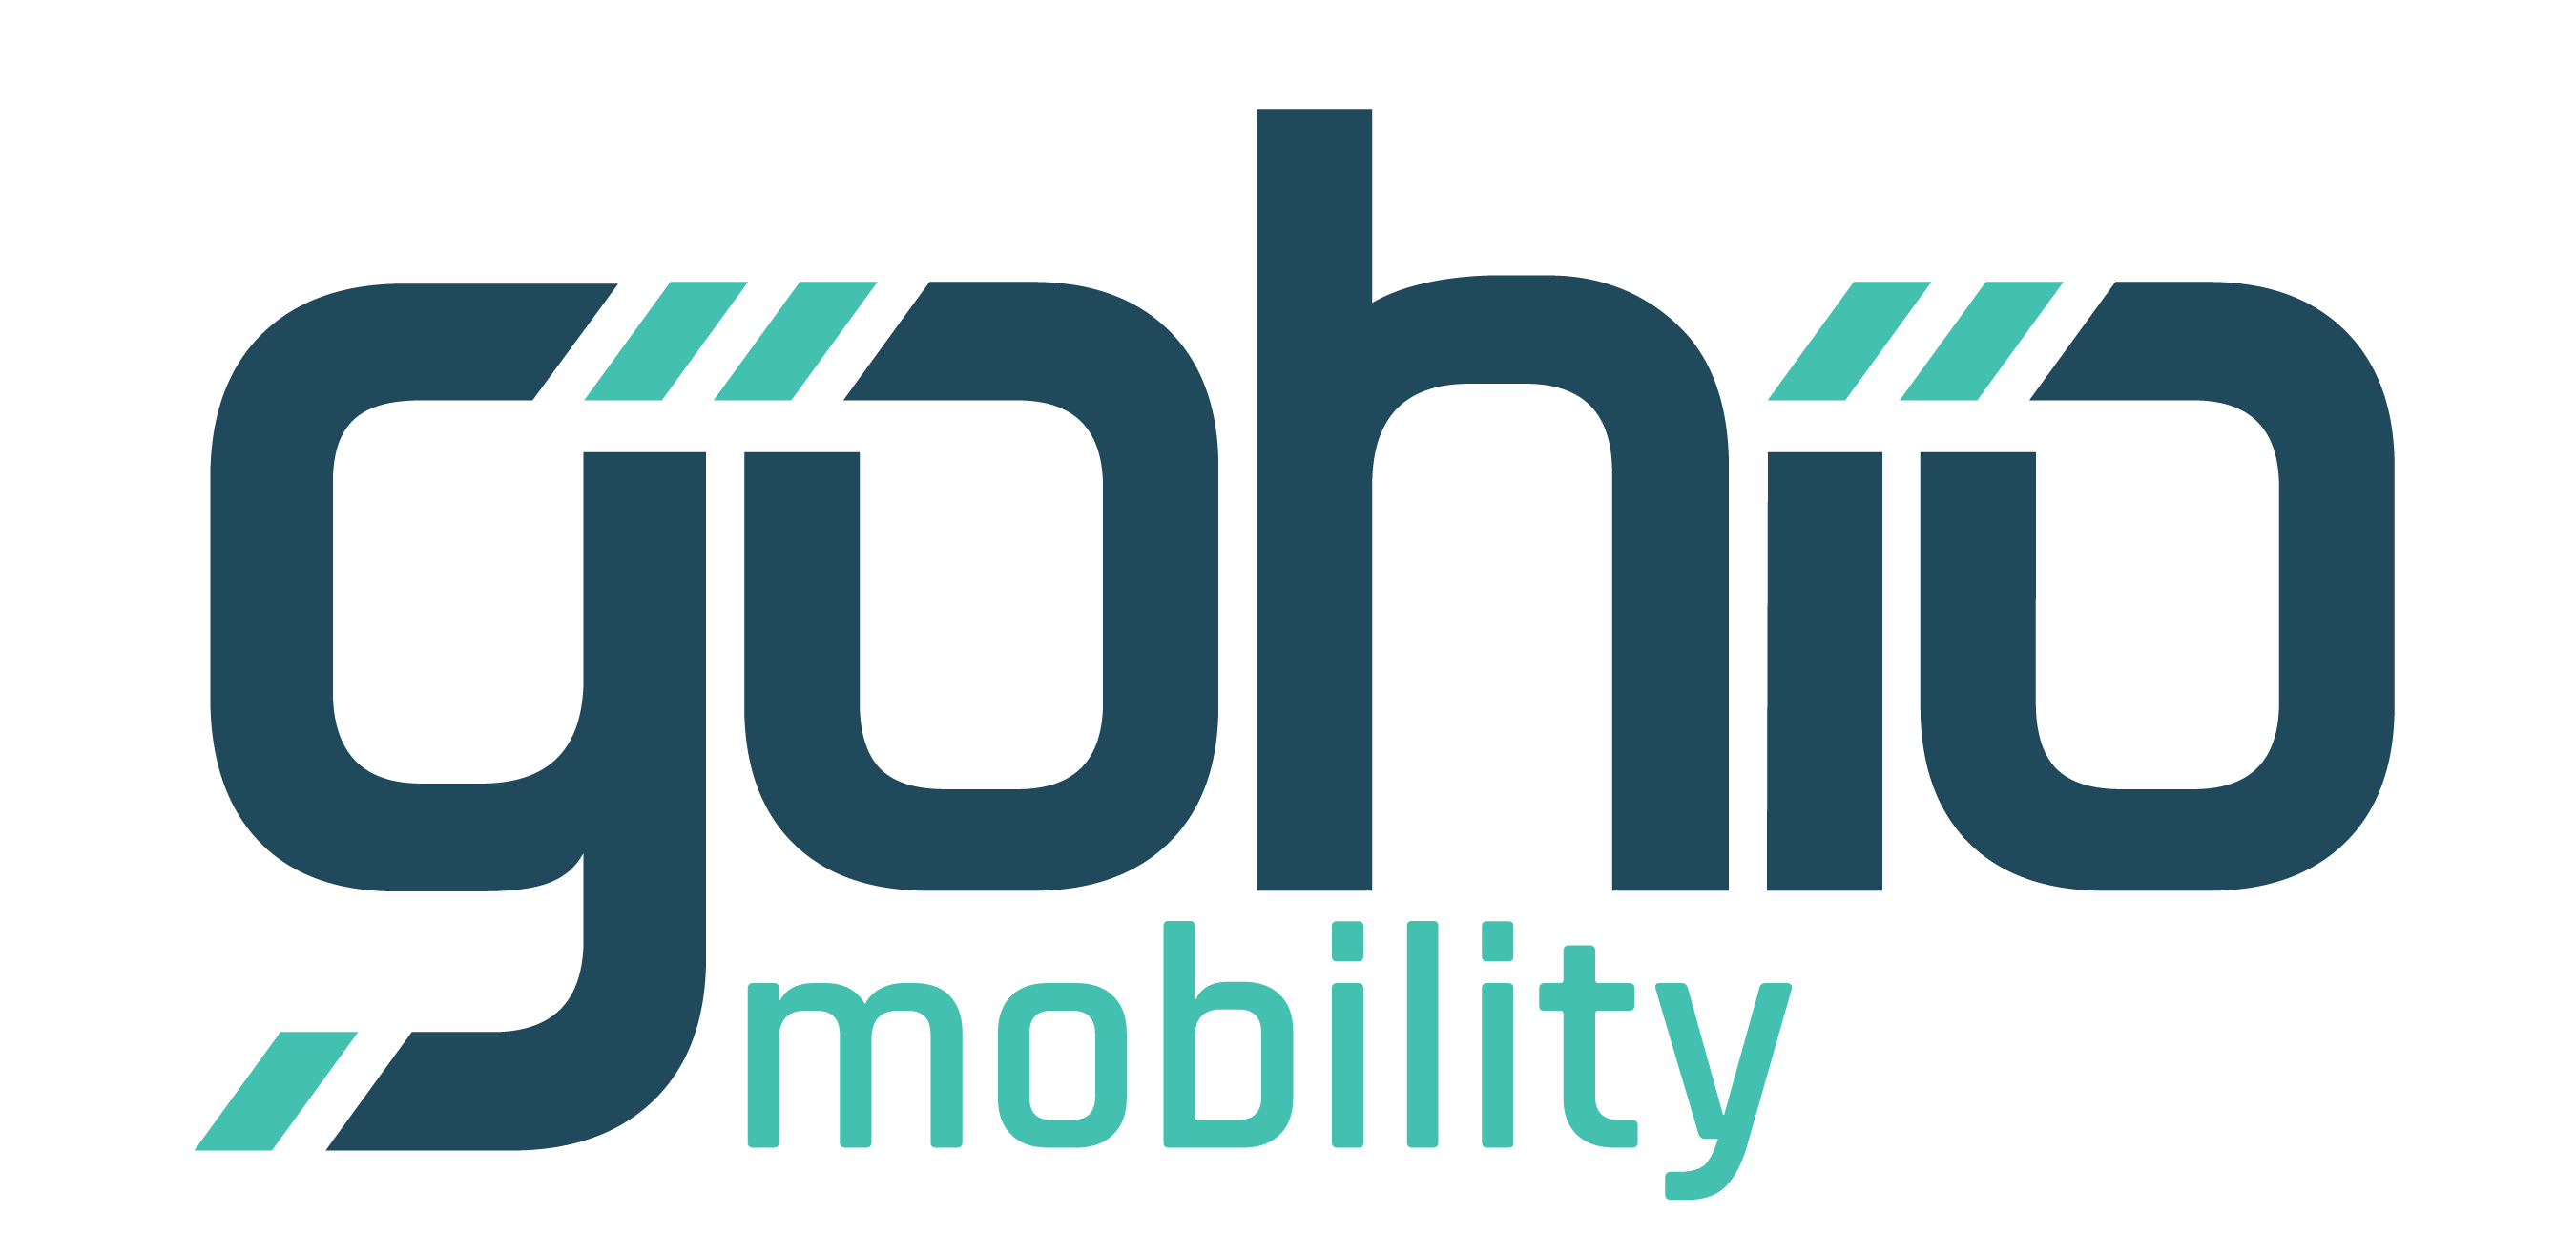 The Gohio Mobility Platform allows you to filter through your transportation options to come up with options that are personalized to your needs.